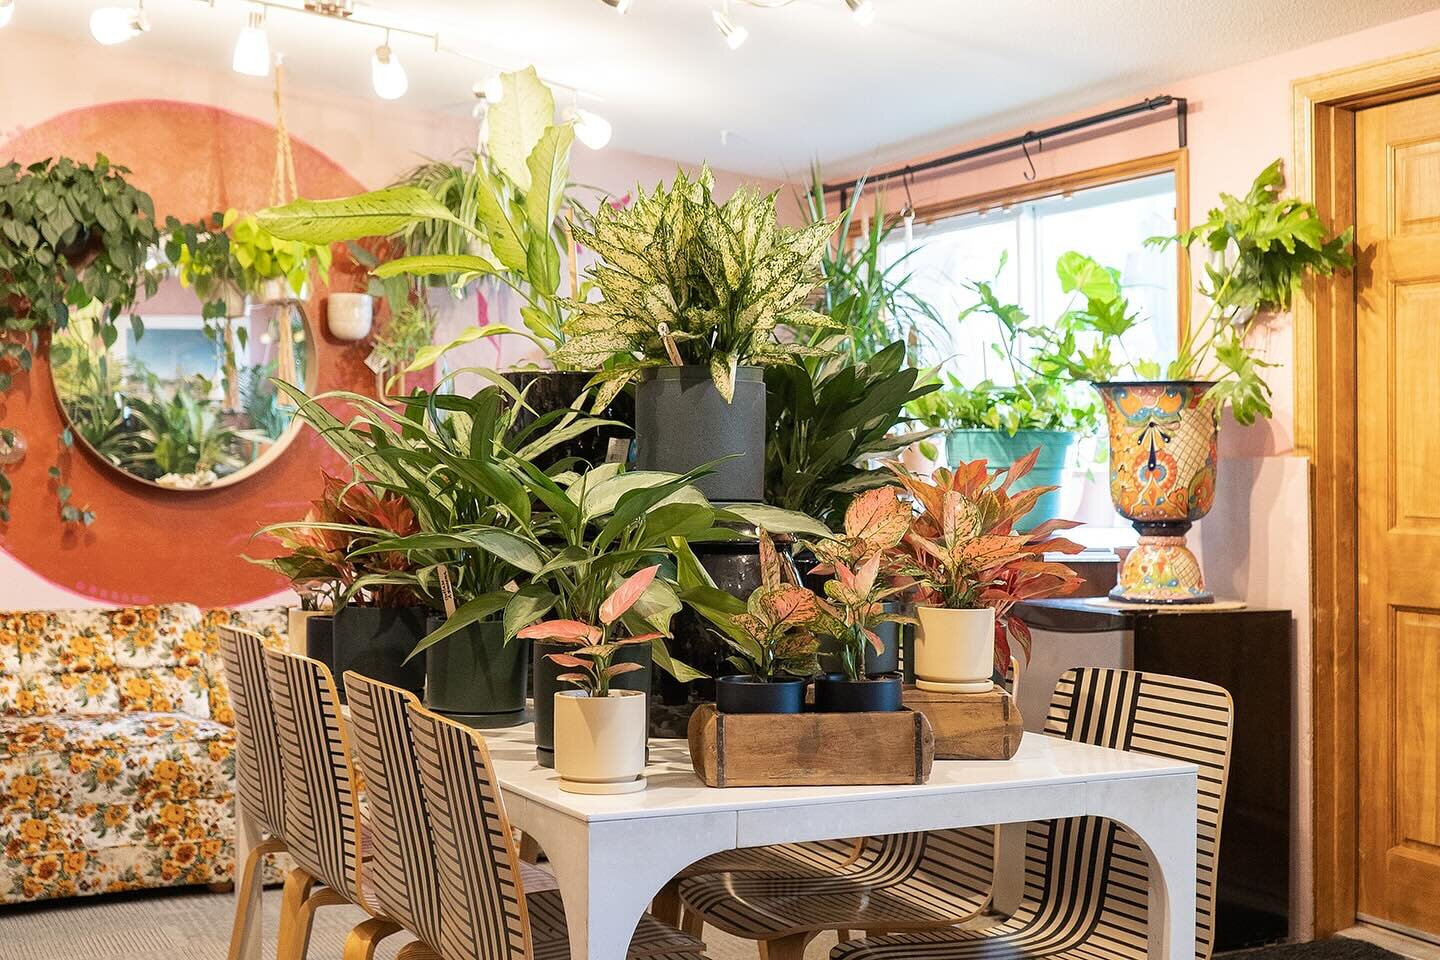 At Home Grown, our cozy shop is getting ready for the promise of sunny days. Bring a piece of spring indoors and let&rsquo;s warm up to the brighter days ahead, Castle Rock! 🌿☀️ 

#CastleRockCO #Spring #HomeGrown #LocalGreenery #SunnyPlants #ShopCas